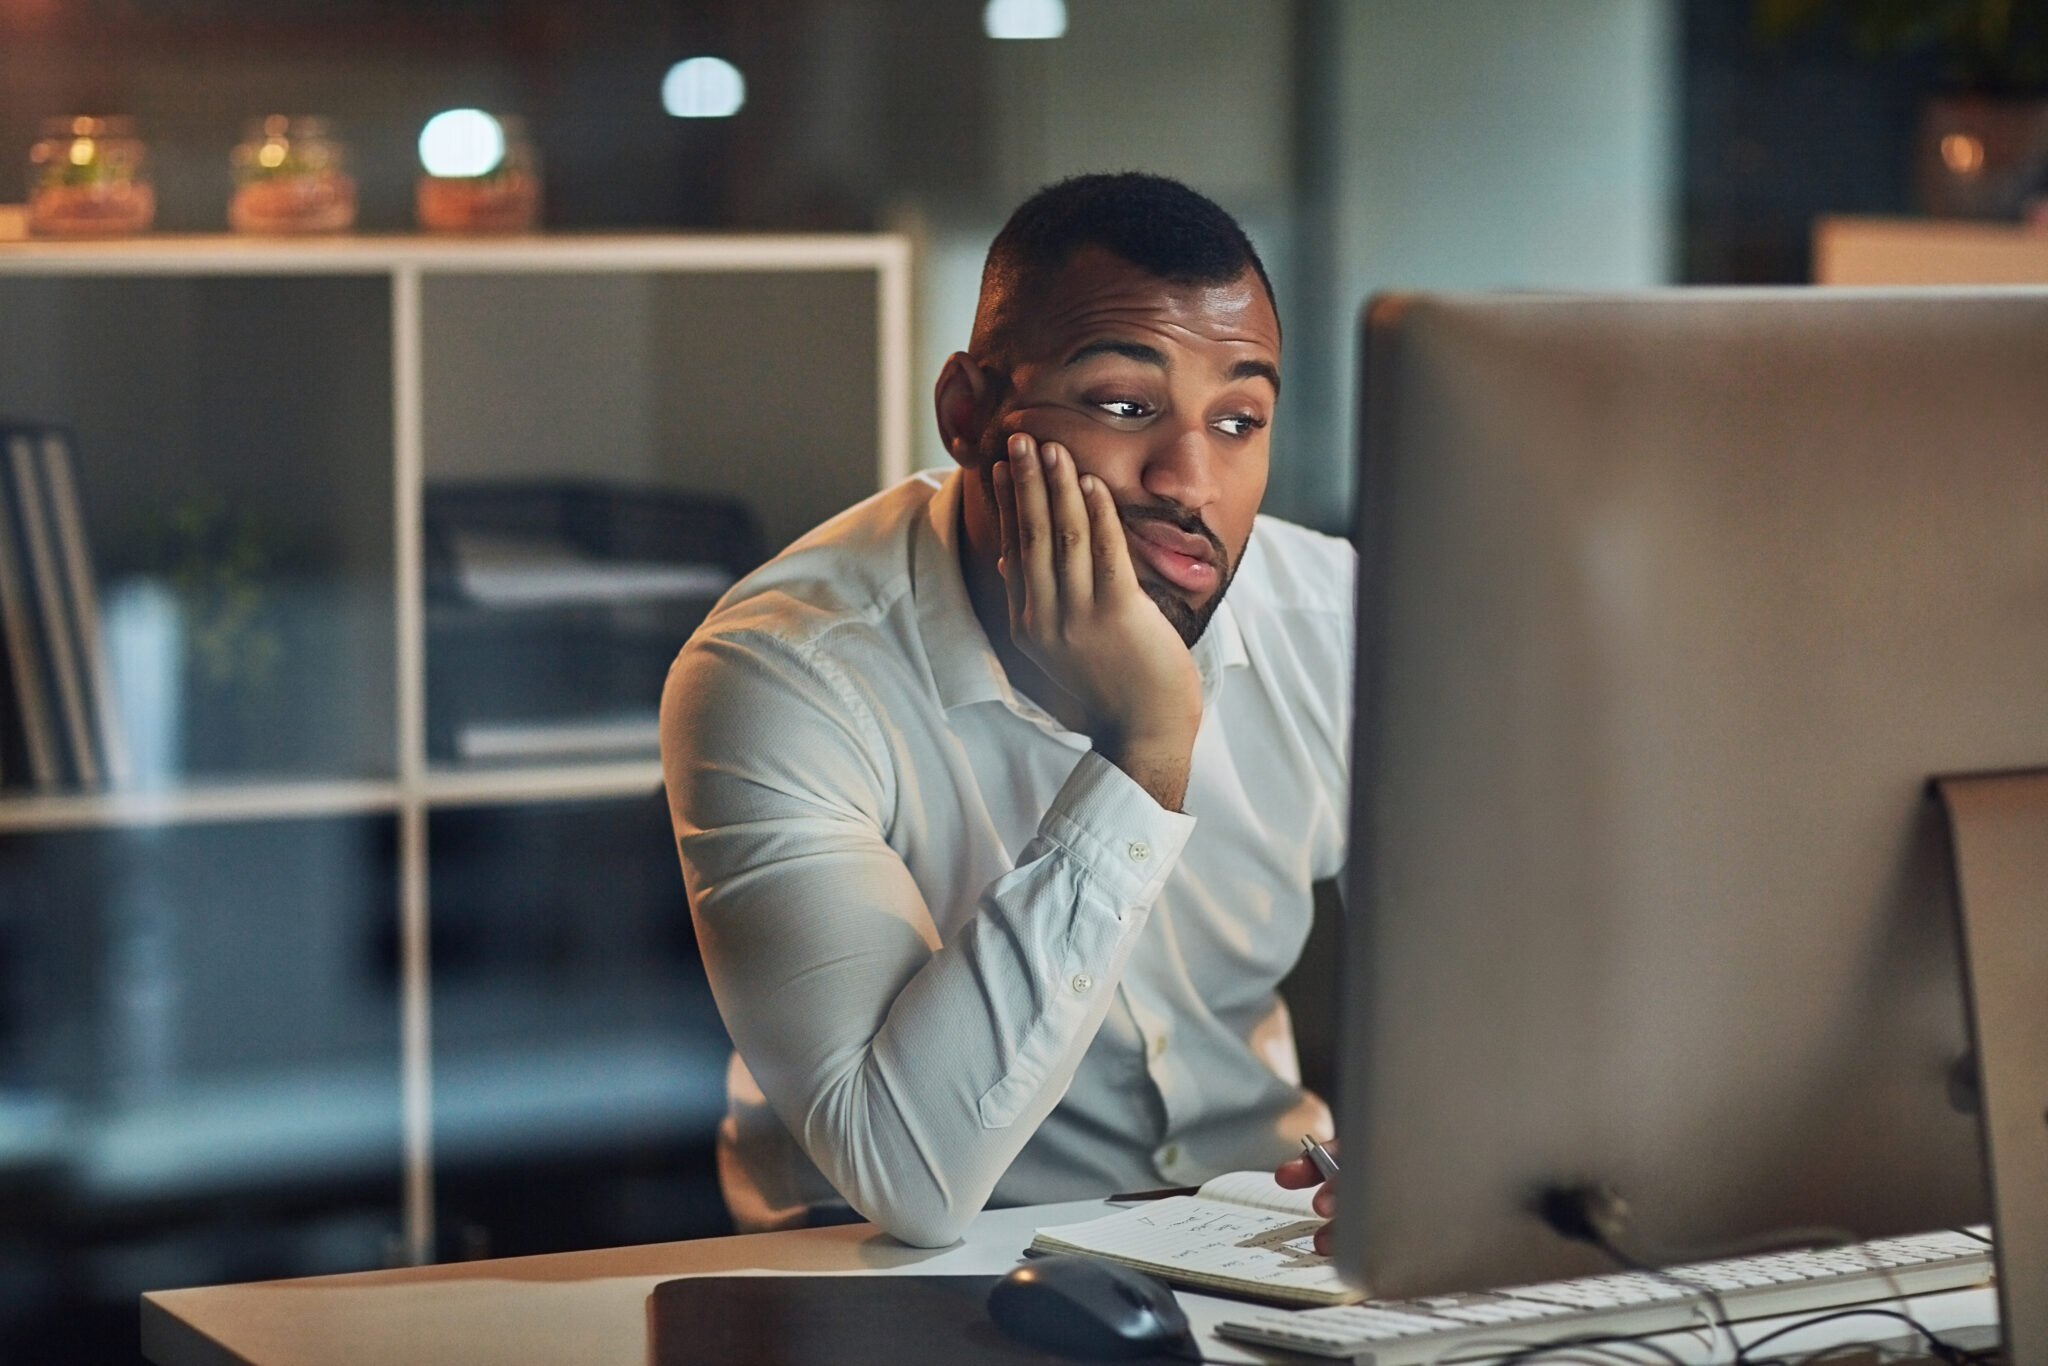 Meeting fatigue - man looking bored and tired in front of computer screen